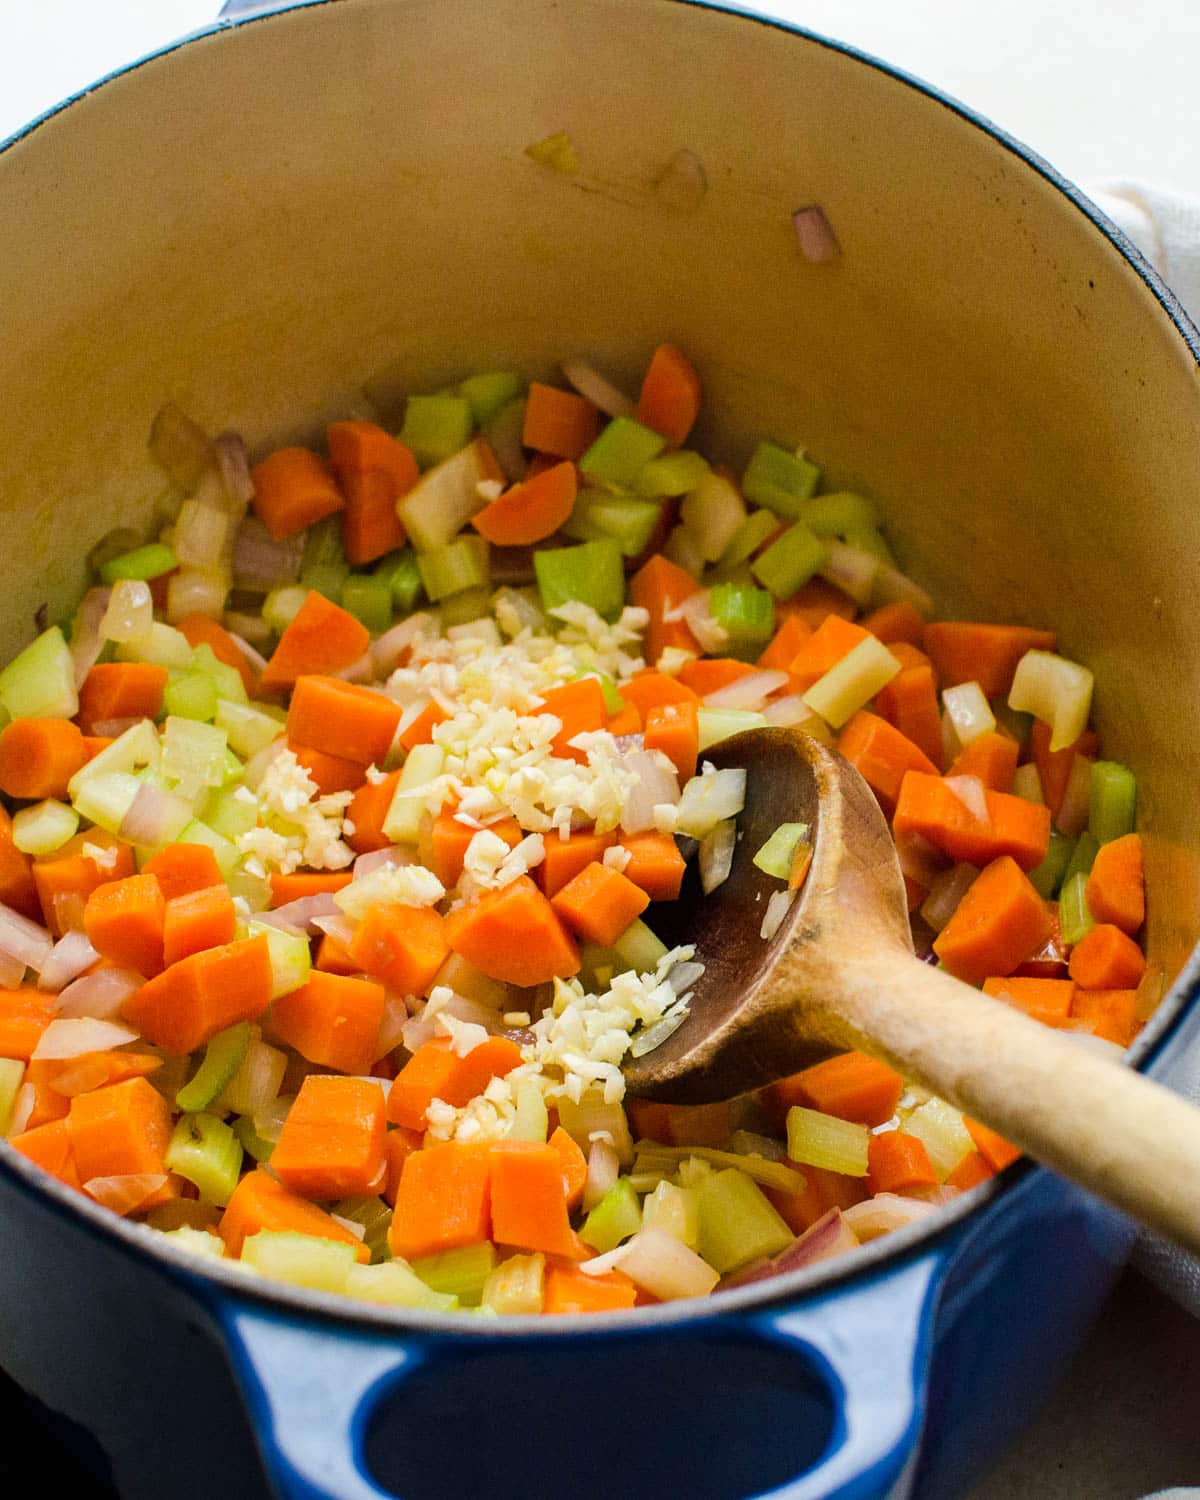 I was sauteing mirepoix and garlic in a Dutch oven.